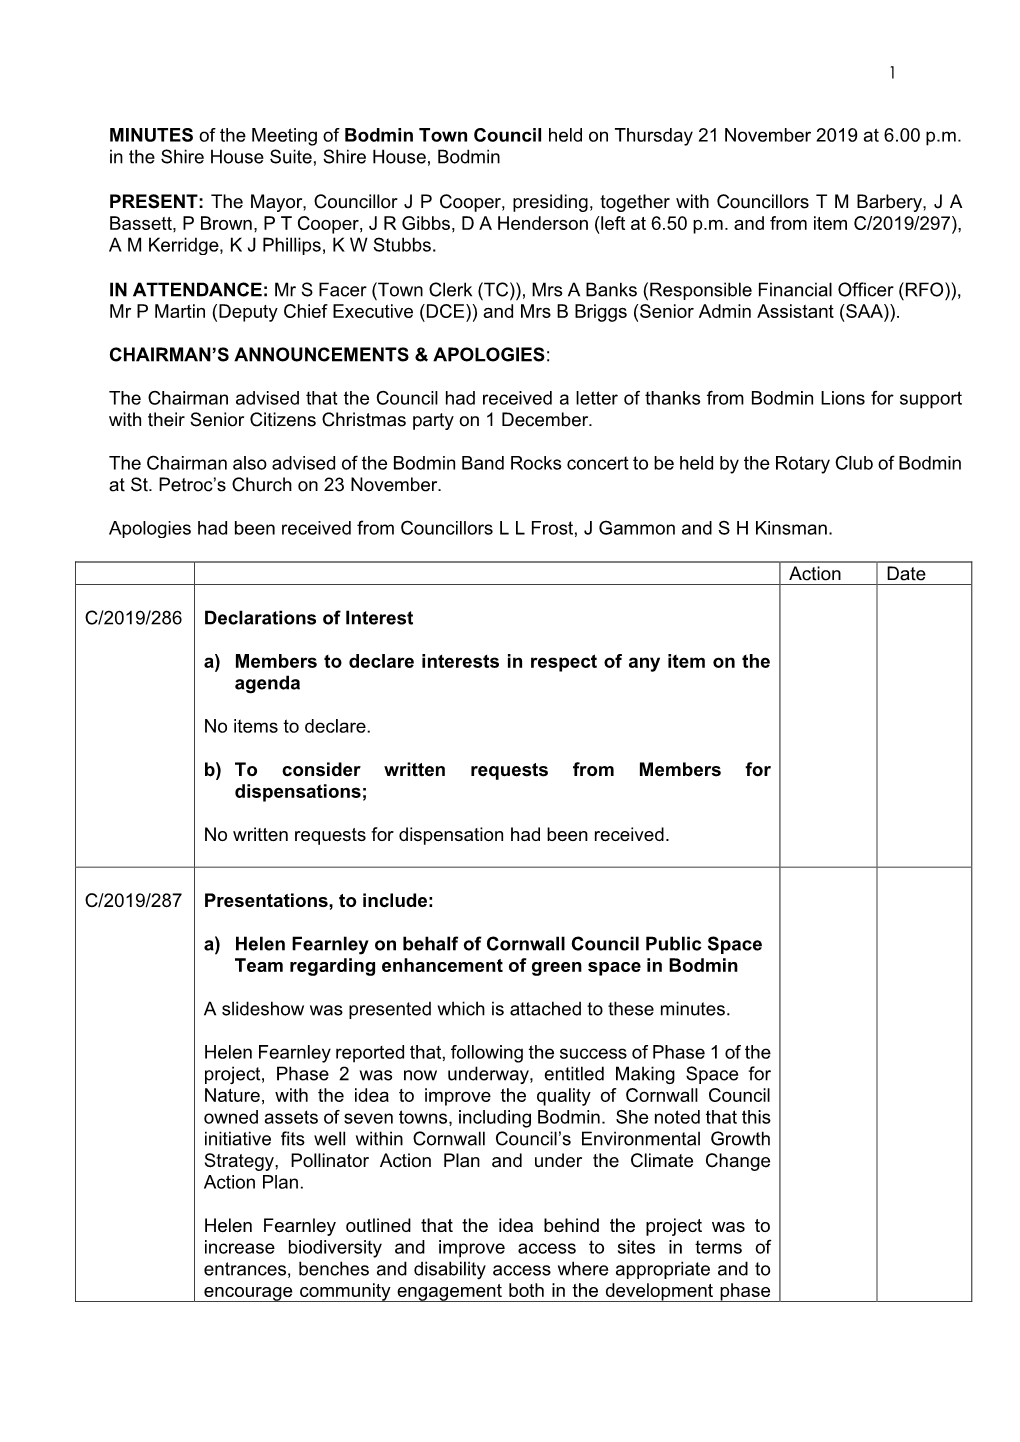 MINUTES of the Meeting of Bodmin Town Council Held on Thursday 21 November 2019 at 6.00 P.M